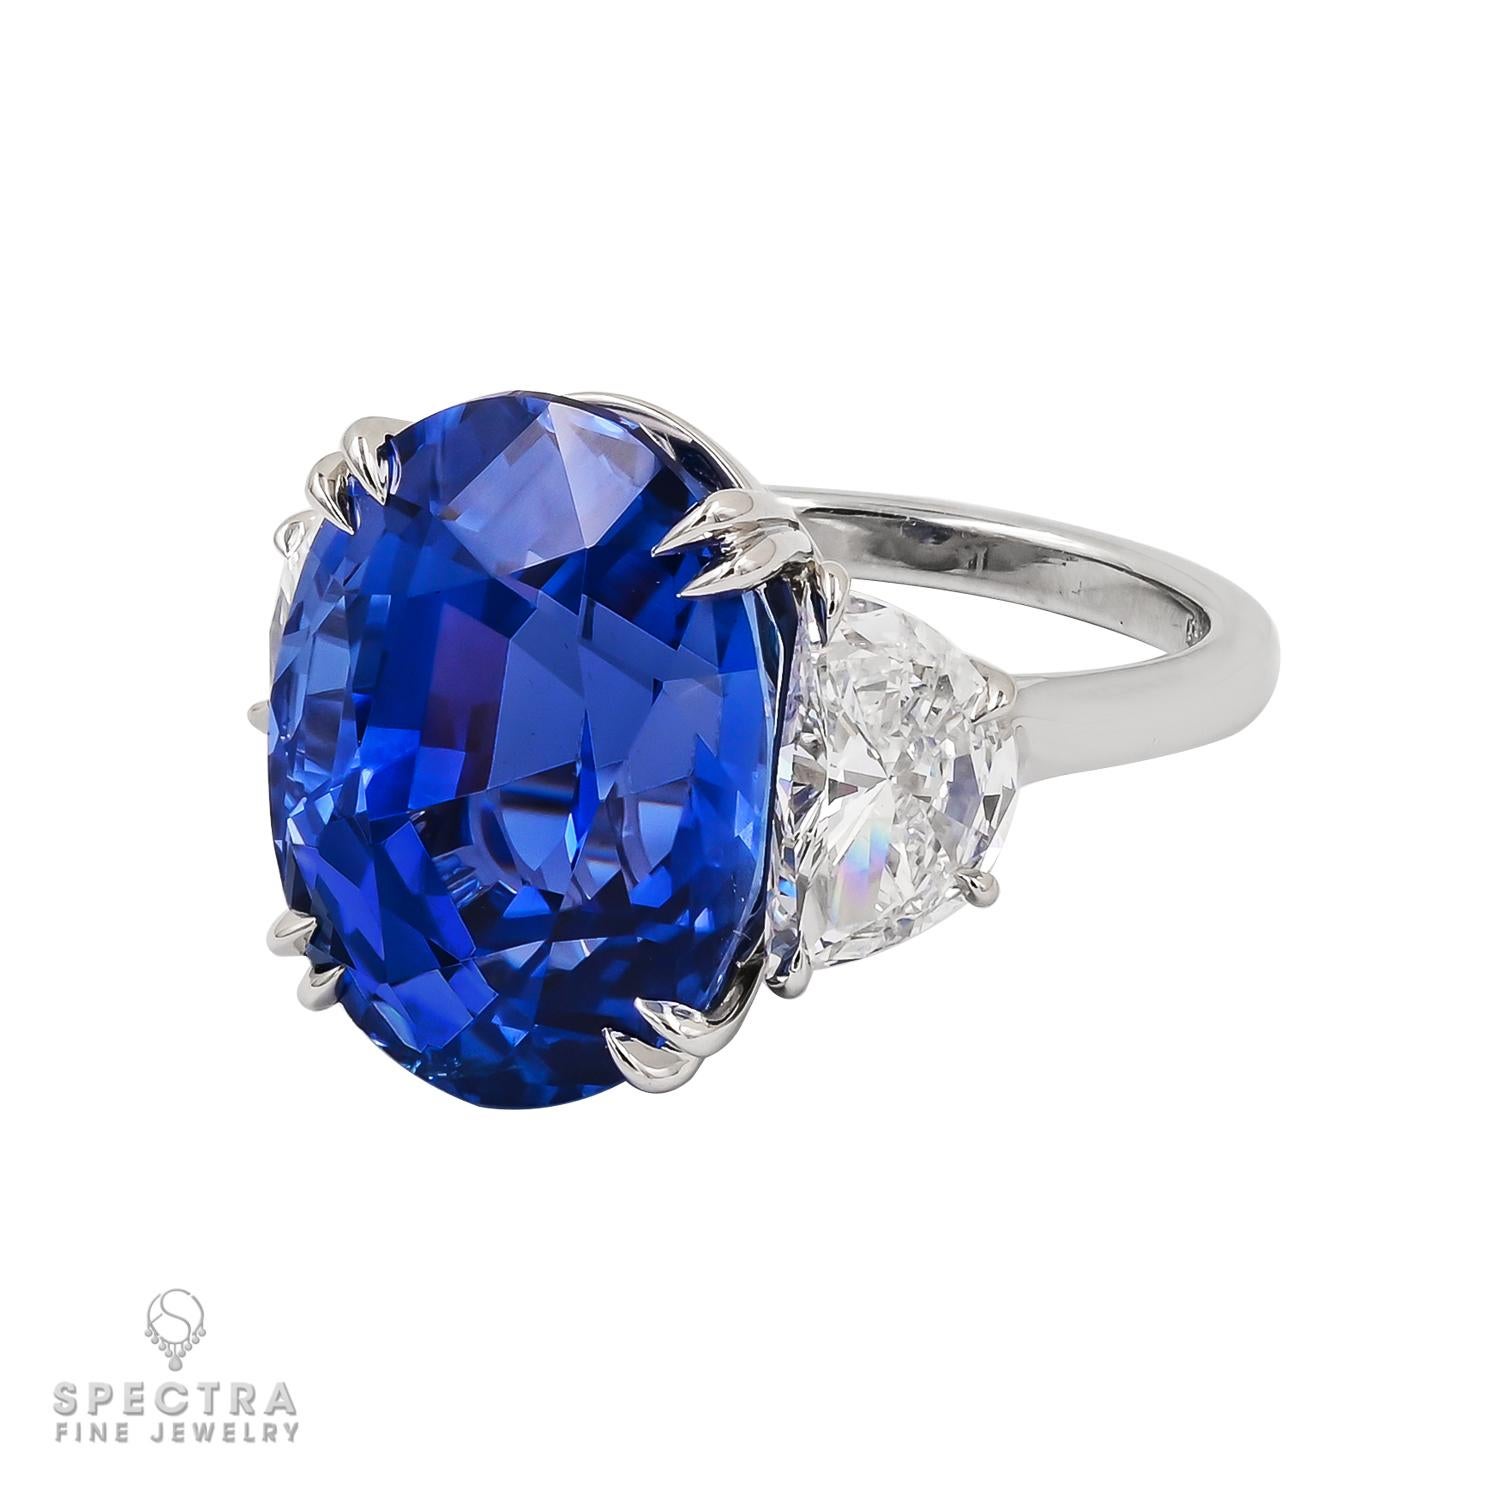 Embrace the epitome of luxury and sophistication with this stunning 20.63-carat Ceylon Sapphire Diamond Ring. Exquisitely crafted, this masterpiece showcases a captivating oval Ceylon blue sapphire, certified by AGL with no indication of thermal